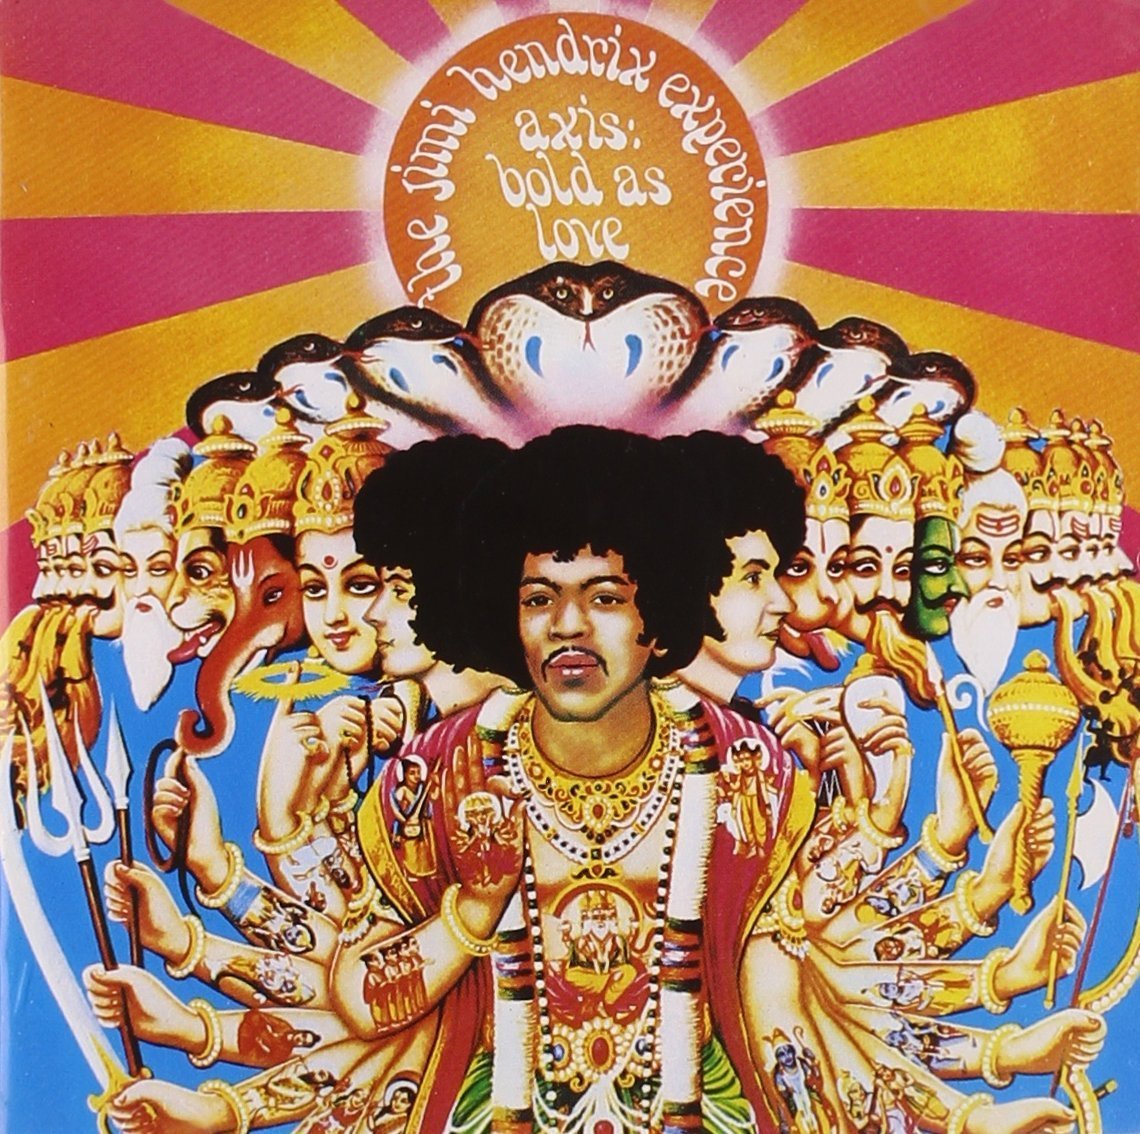 The Jimi Hendrix Experience - Axis: Bold As Love Records & LPs Vinyl